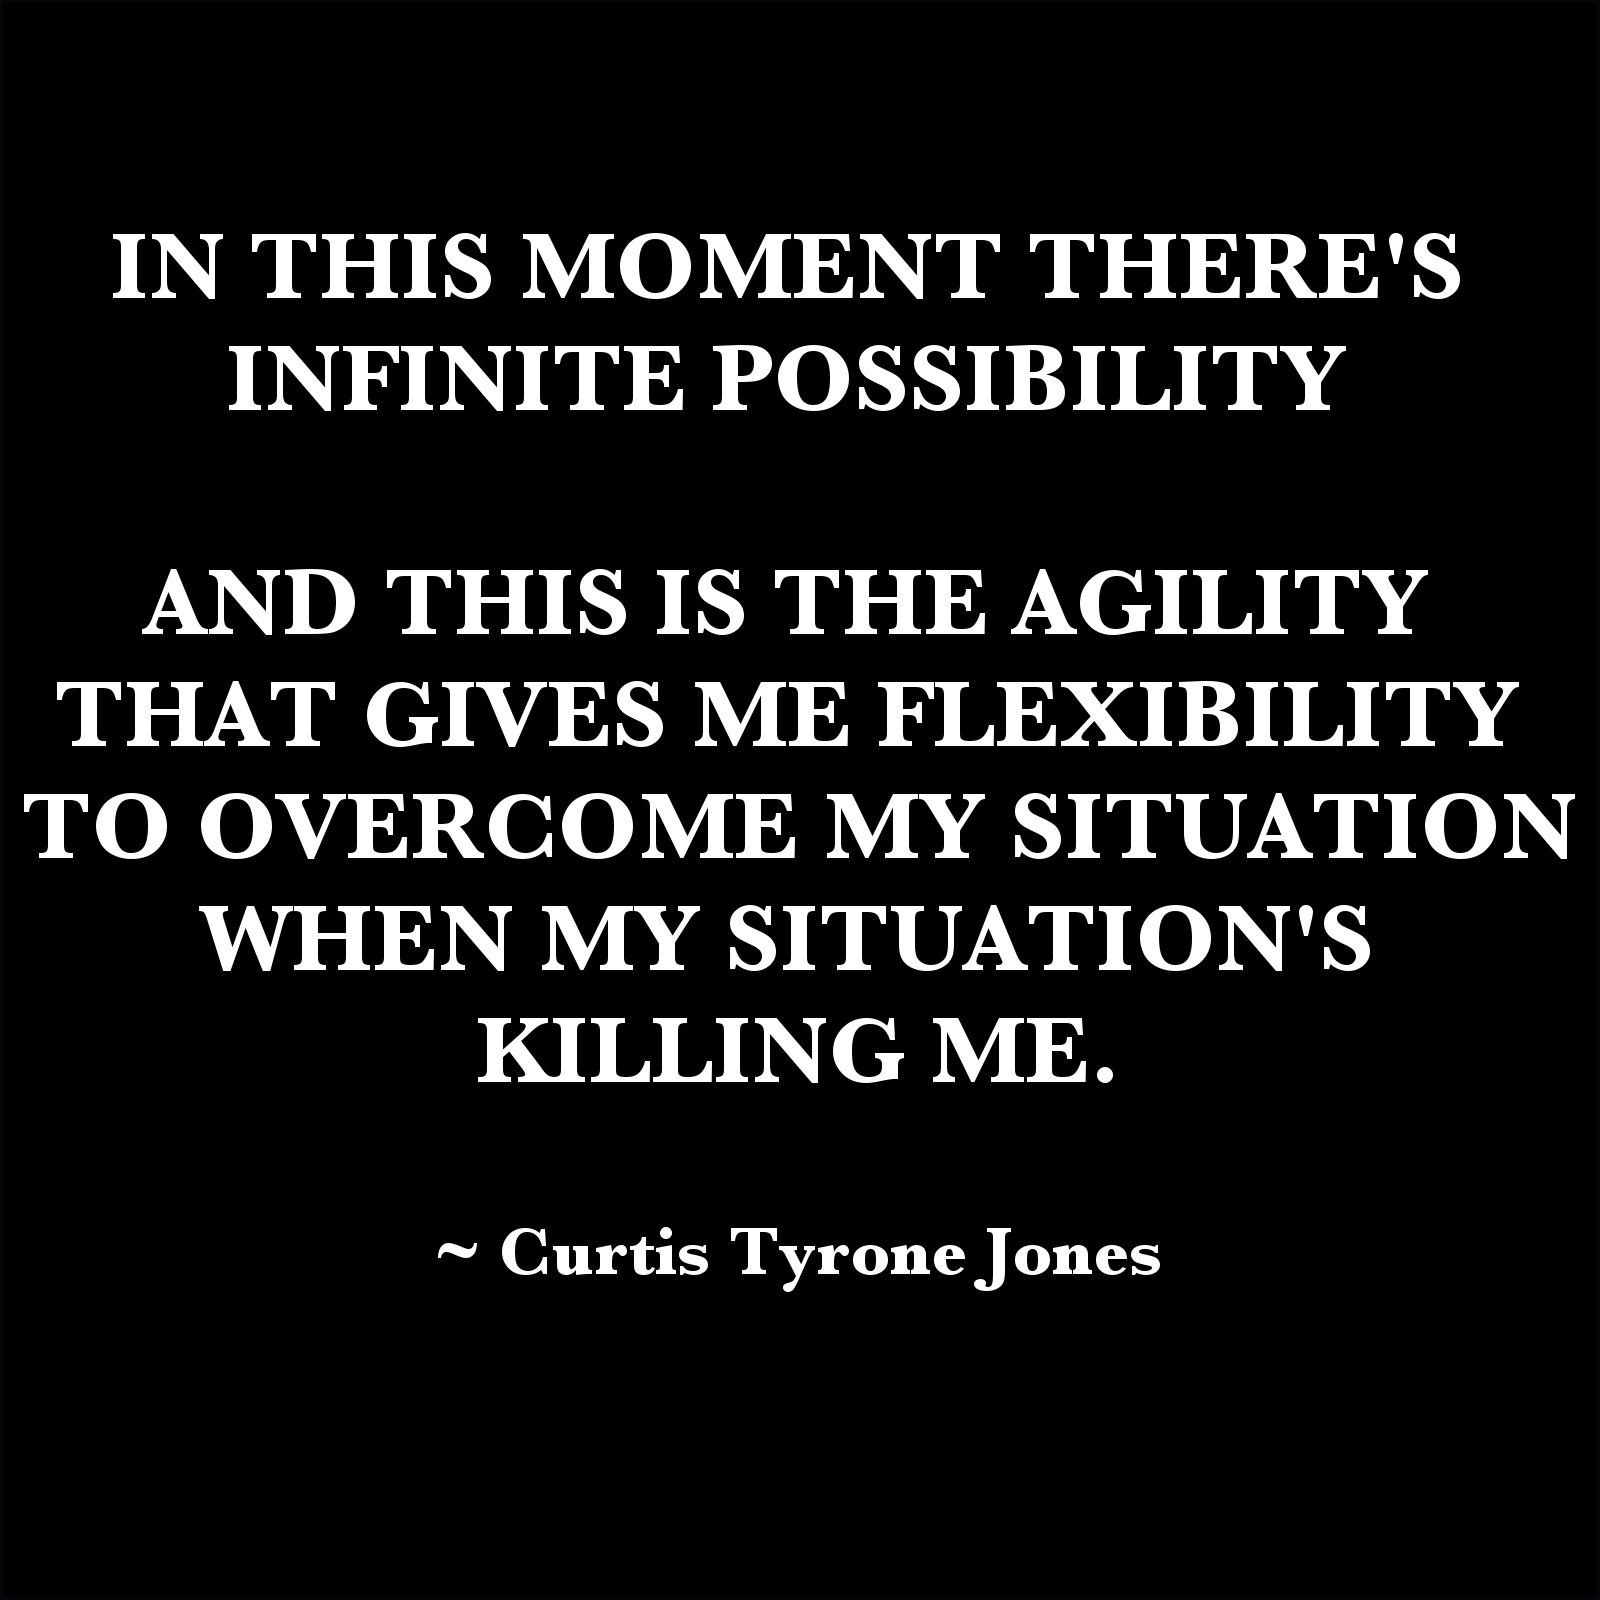 In this moment there’s infinite possibility and this is the agility that gives me flexibility to overcome my situation when my situation’s killing me. Curtis Tyrone Jones